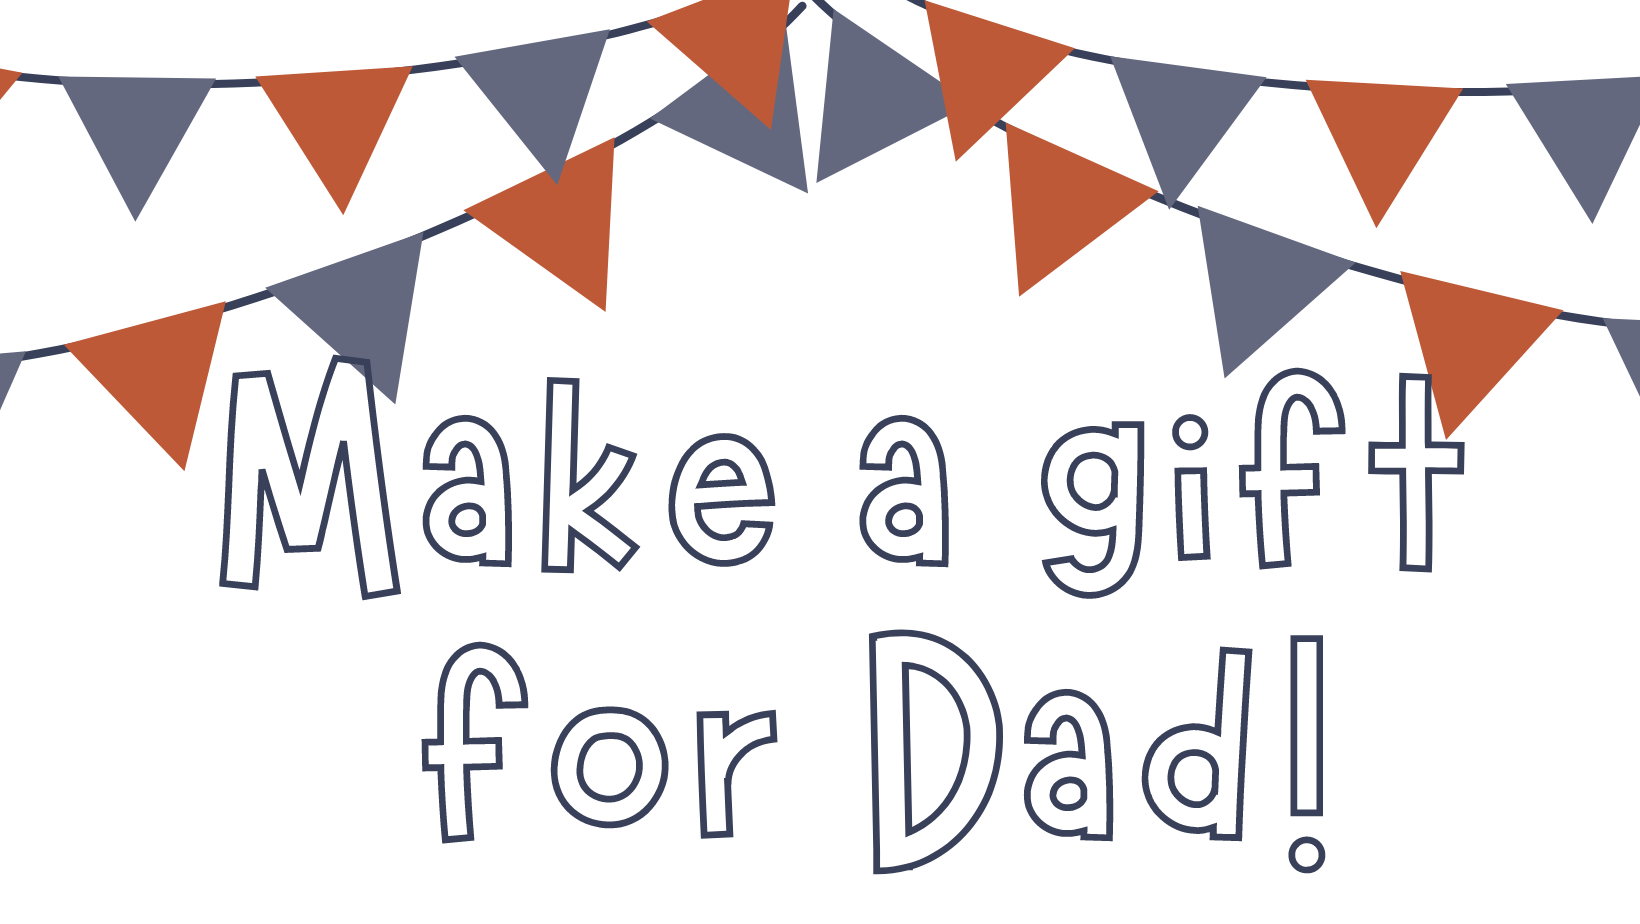 Make a Gift for Dad with blue and orange flag banners